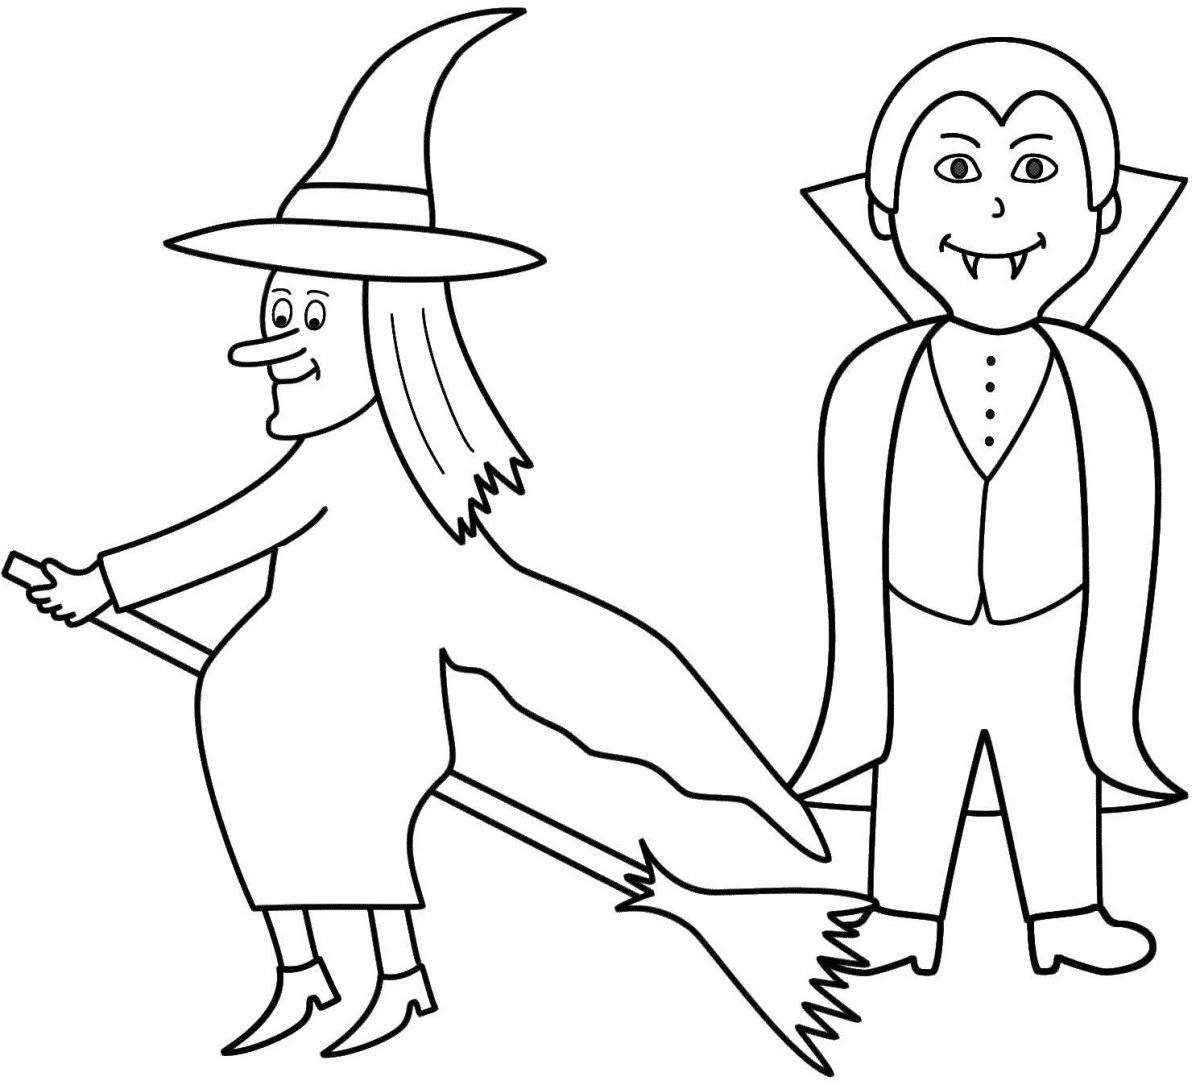 Hansel and Gretel funny coloring pages